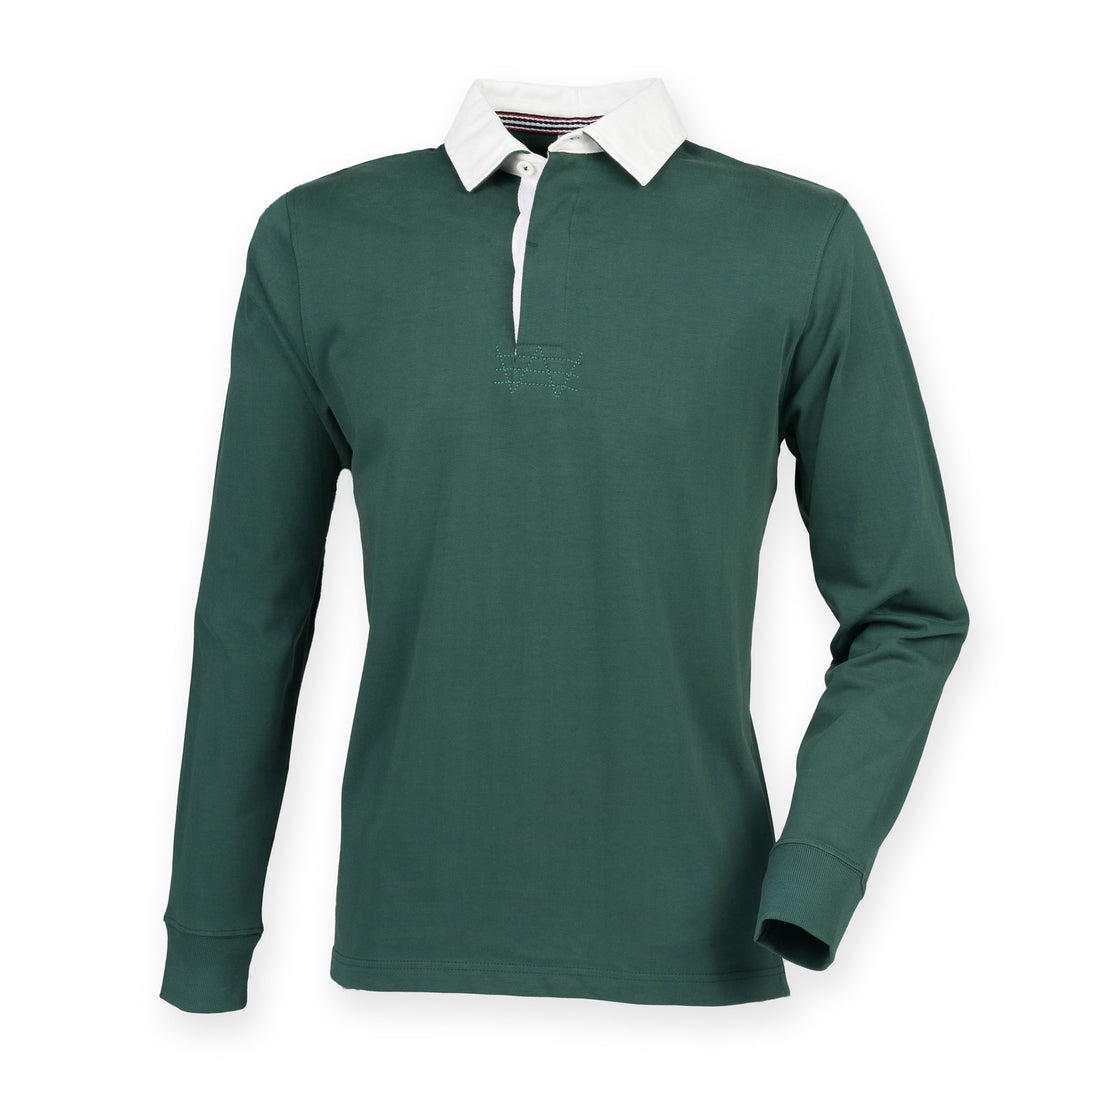 Our 'supersoft' Premium Rugby Shirts - now available in Bottle Green